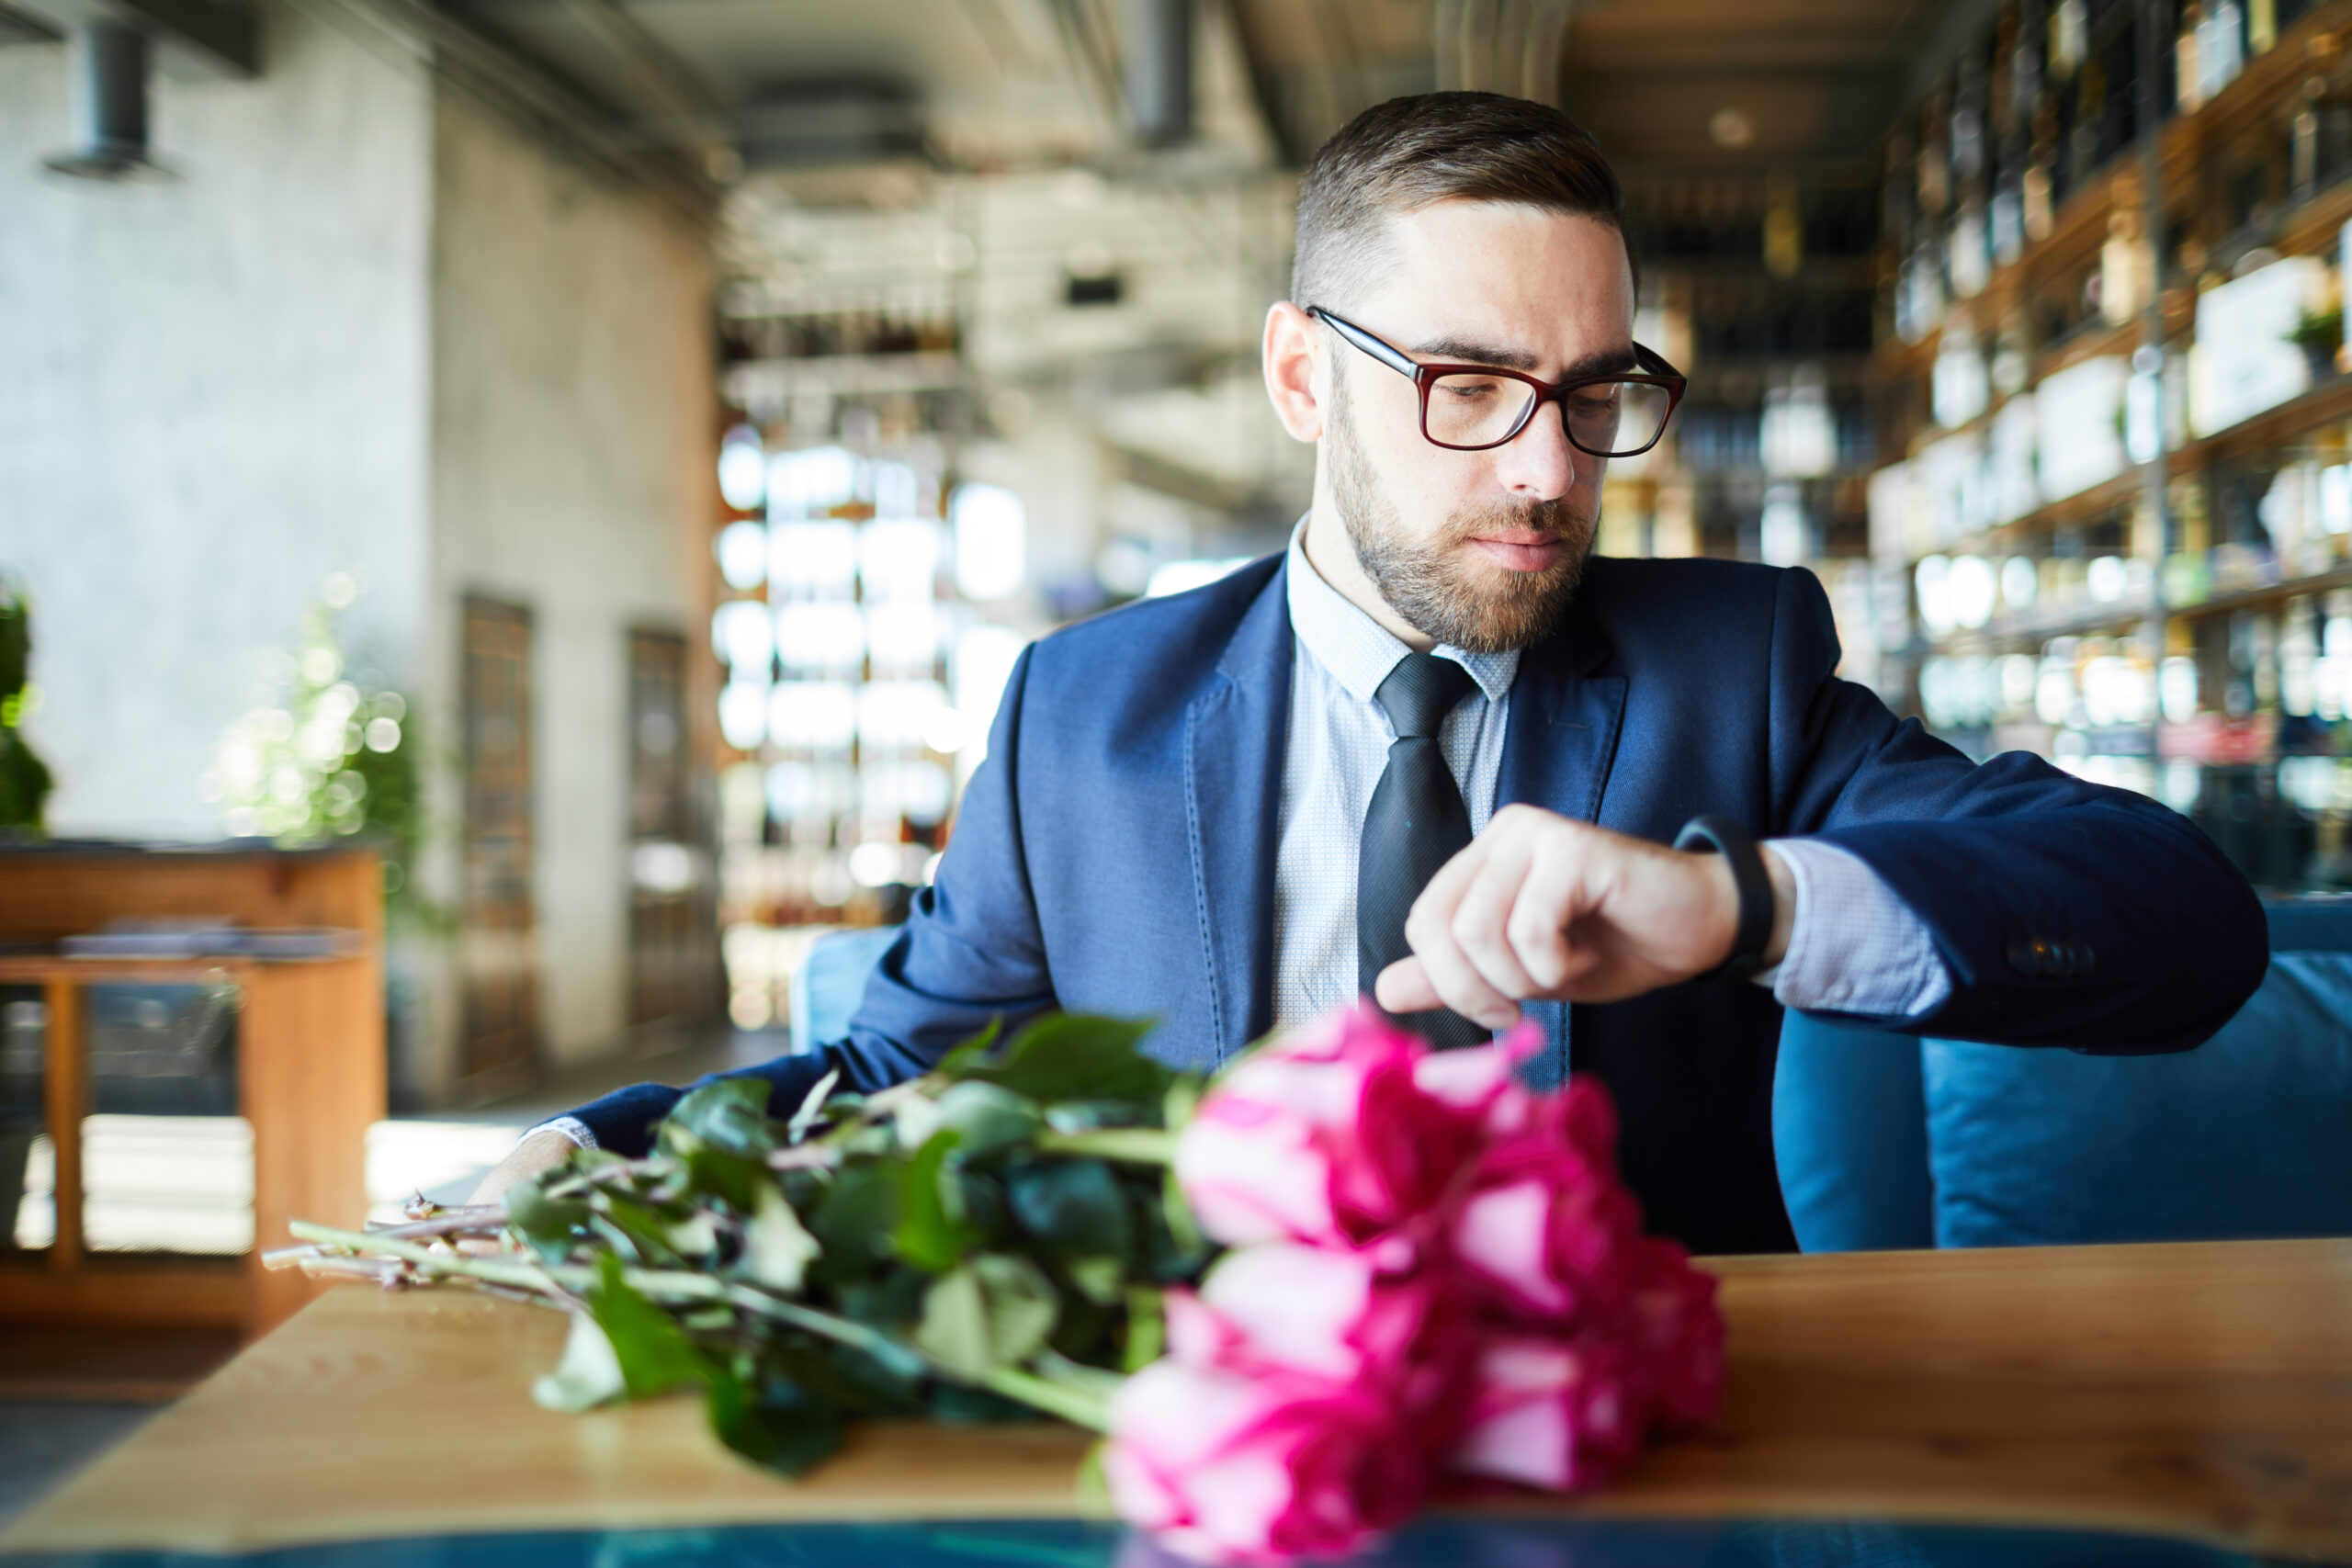 Avoid These 12 First Date Mistakes Men Make: Tips for a Great First Impression Career Professionals,Like-Minded Career Professionals